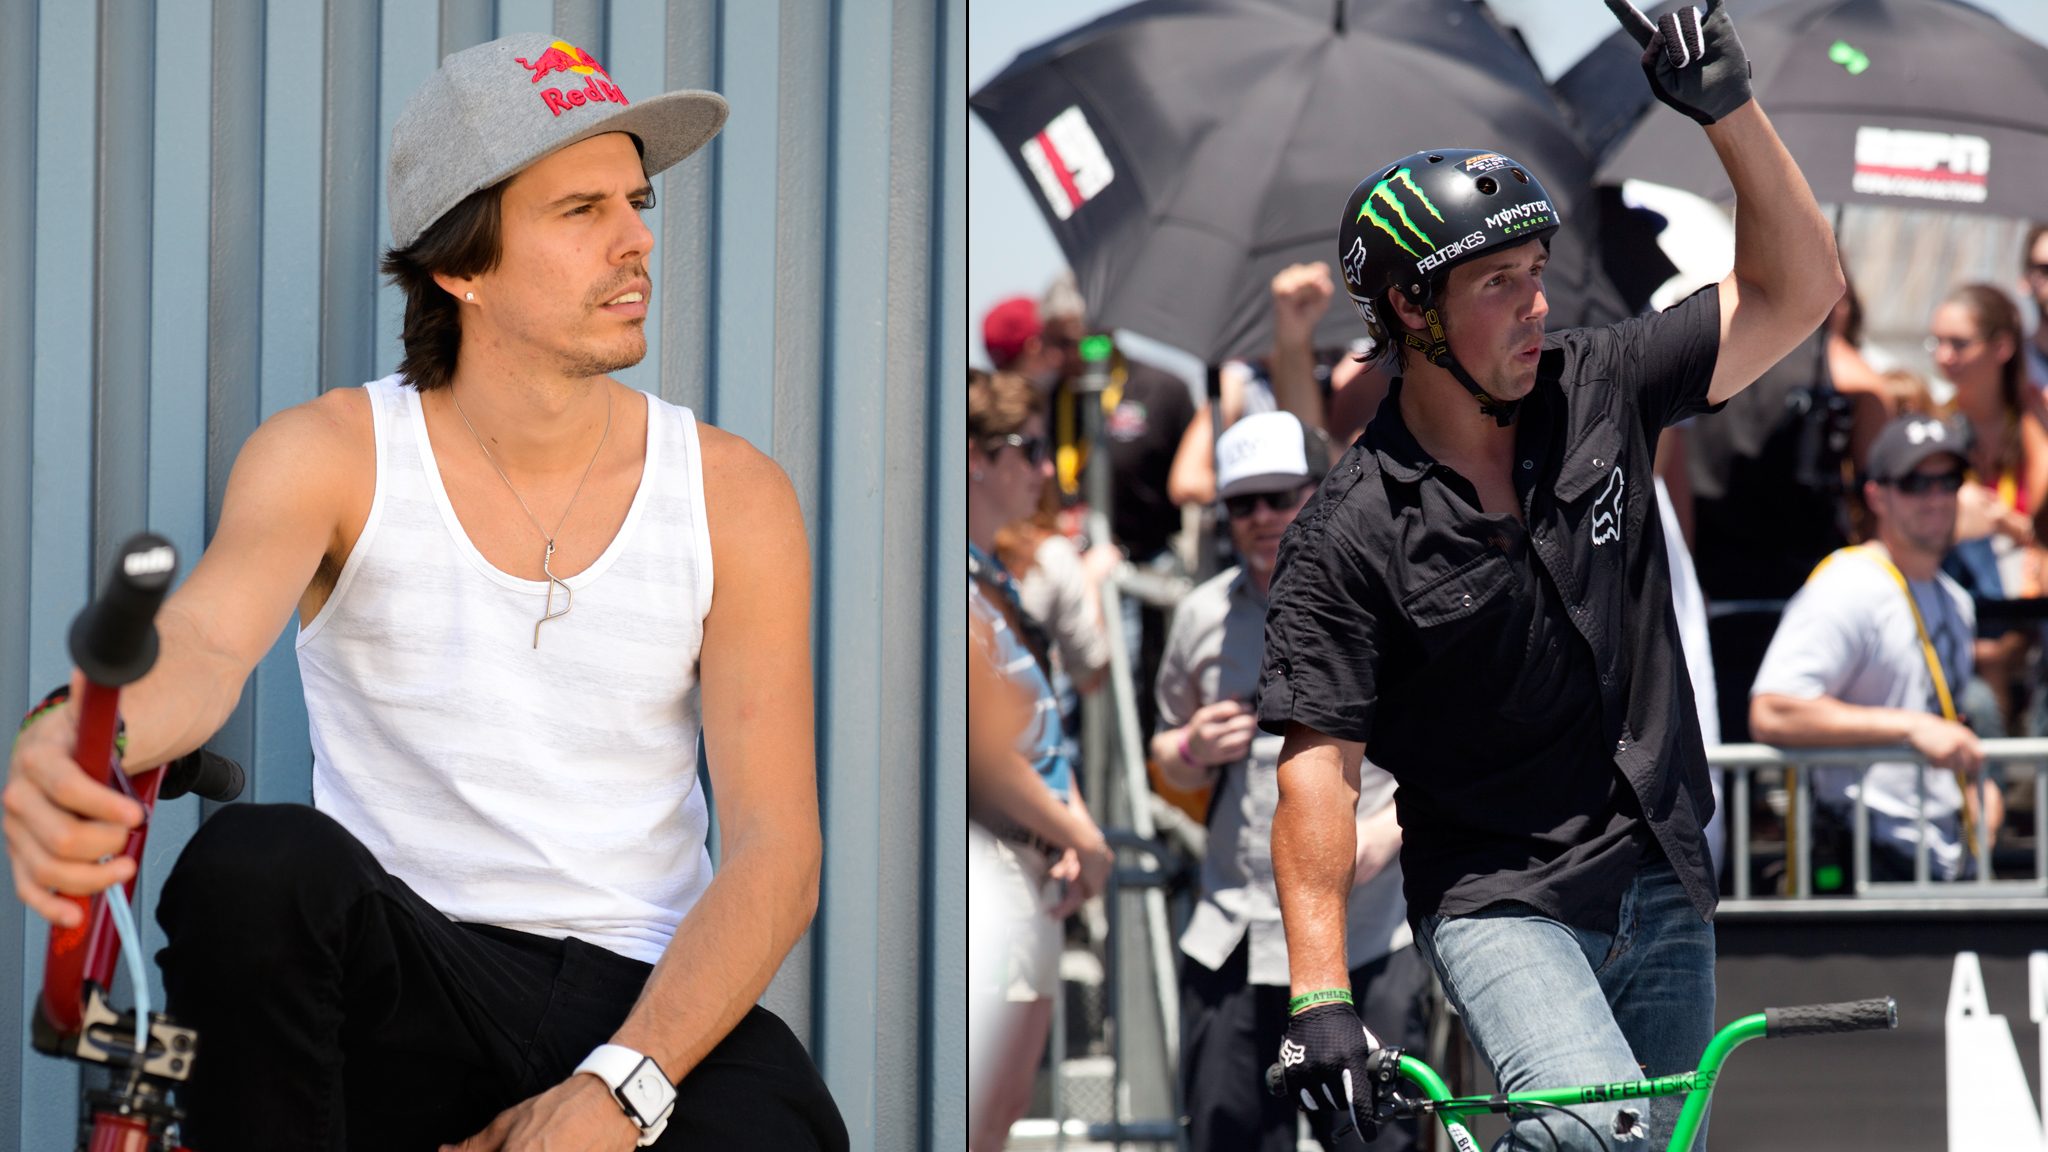 Daniel Dhers (left) is seeking redemption in Brazil after losing the BMX Park gold medal to Scotty Cranmer (right) at X Games Los Angeles 2012.